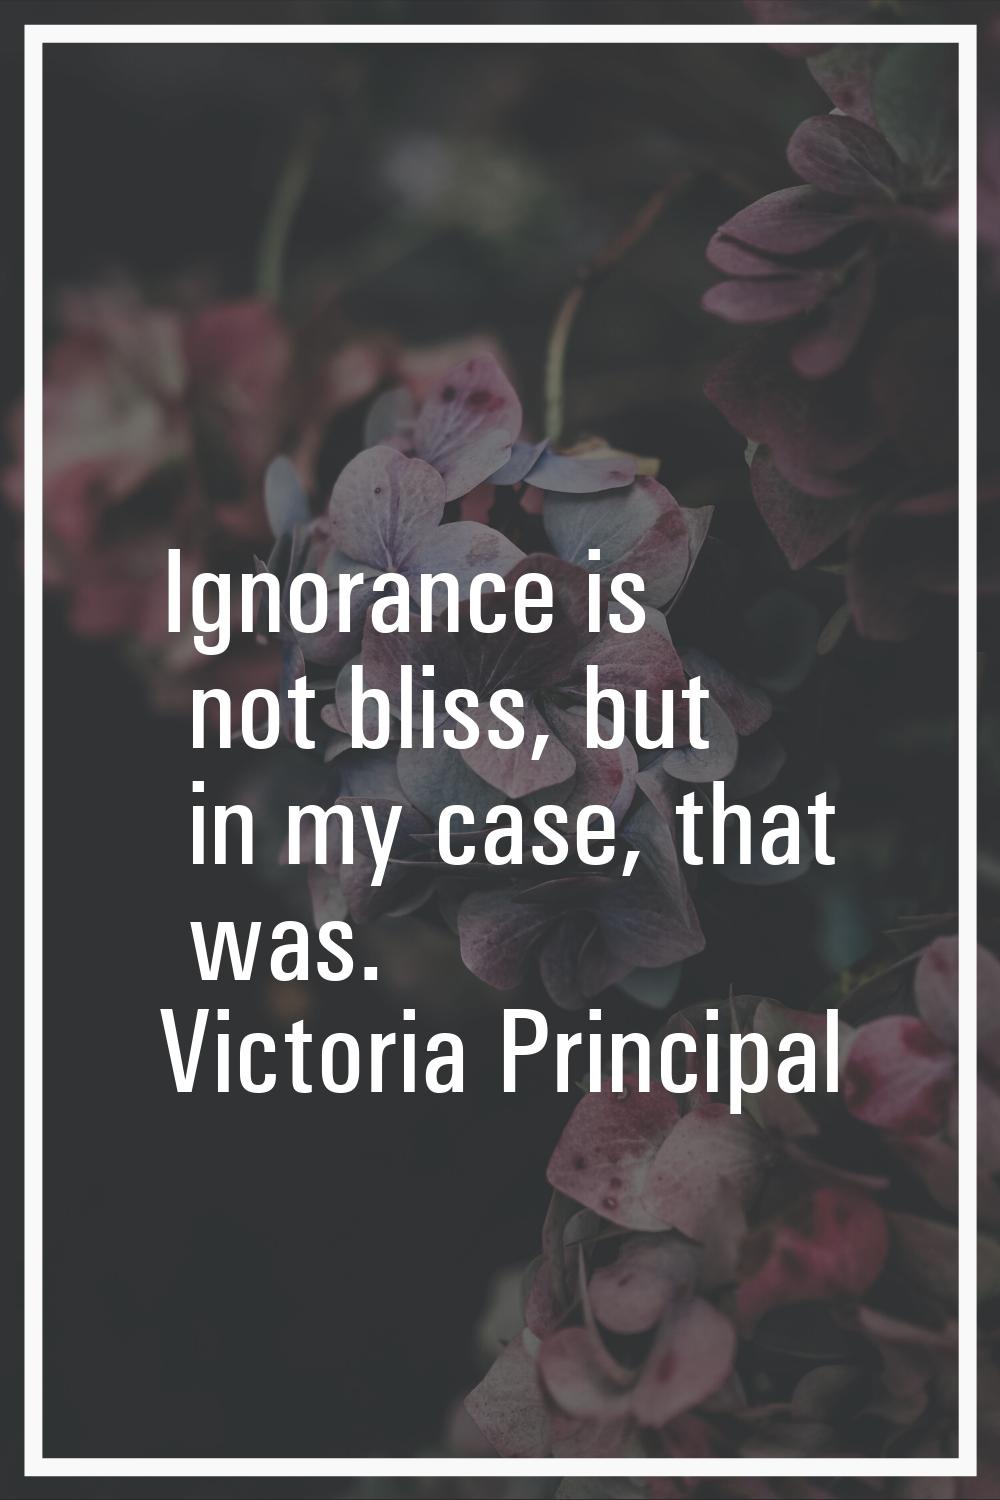 Ignorance is not bliss, but in my case, that was.